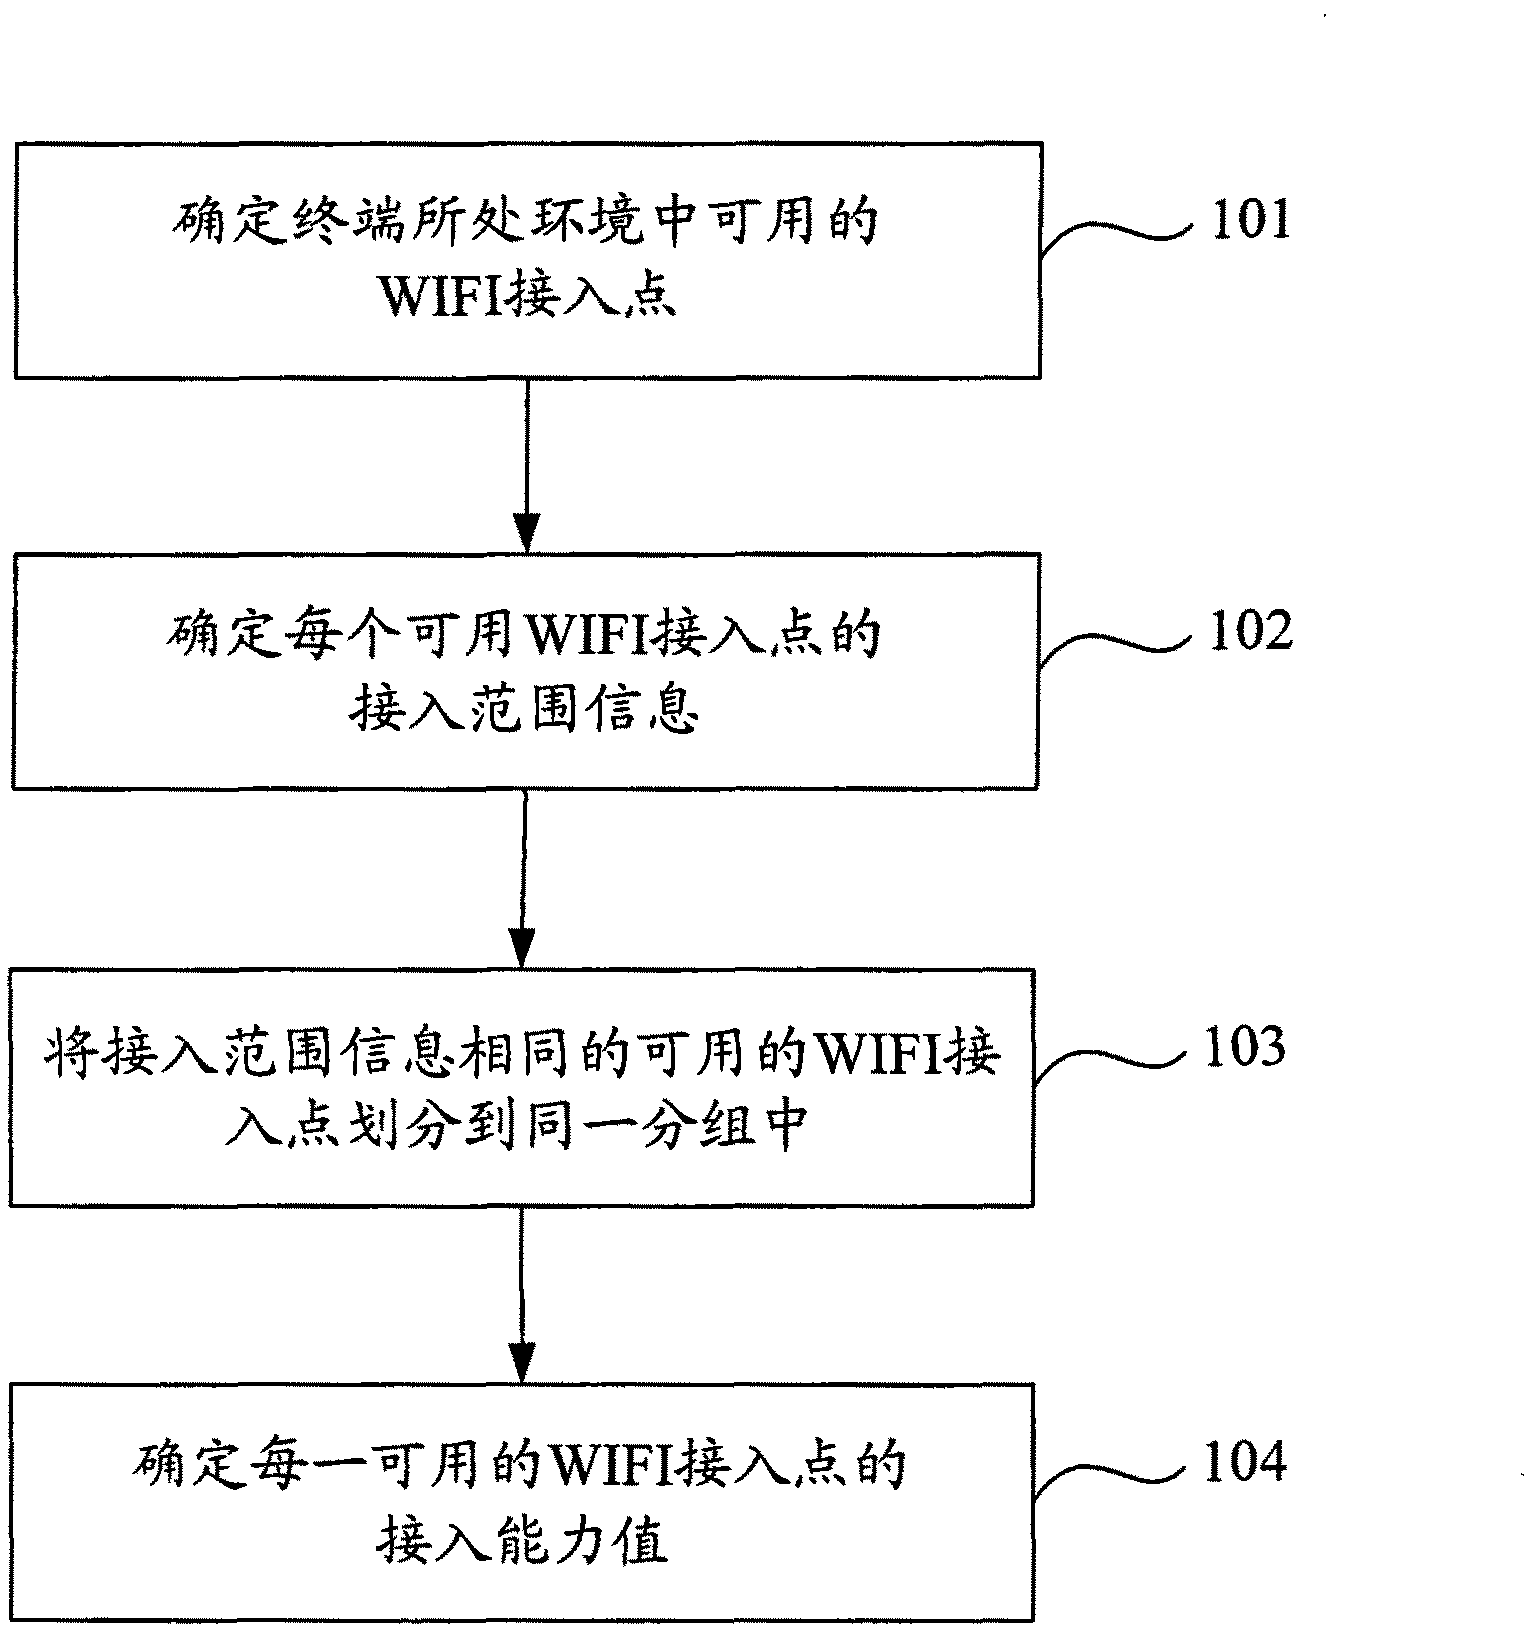 Method and device for selecting WIFI (Wireless Fidelity) access point to access to network